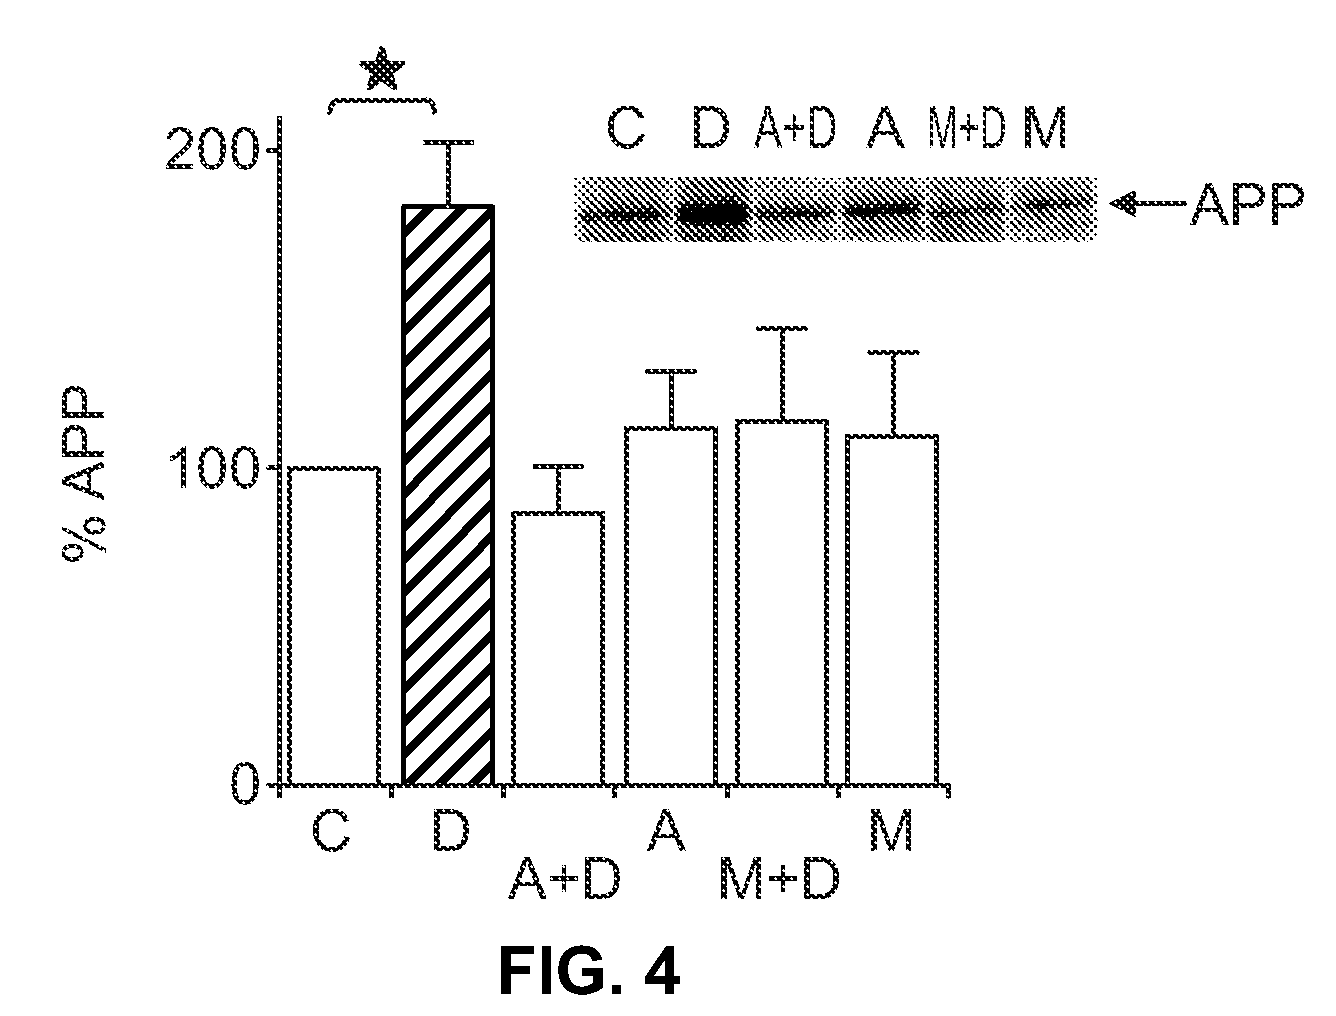 Methods for Inhibiting Amyloid Precursor Protein and Beta-Amyloid Production and Accumulation